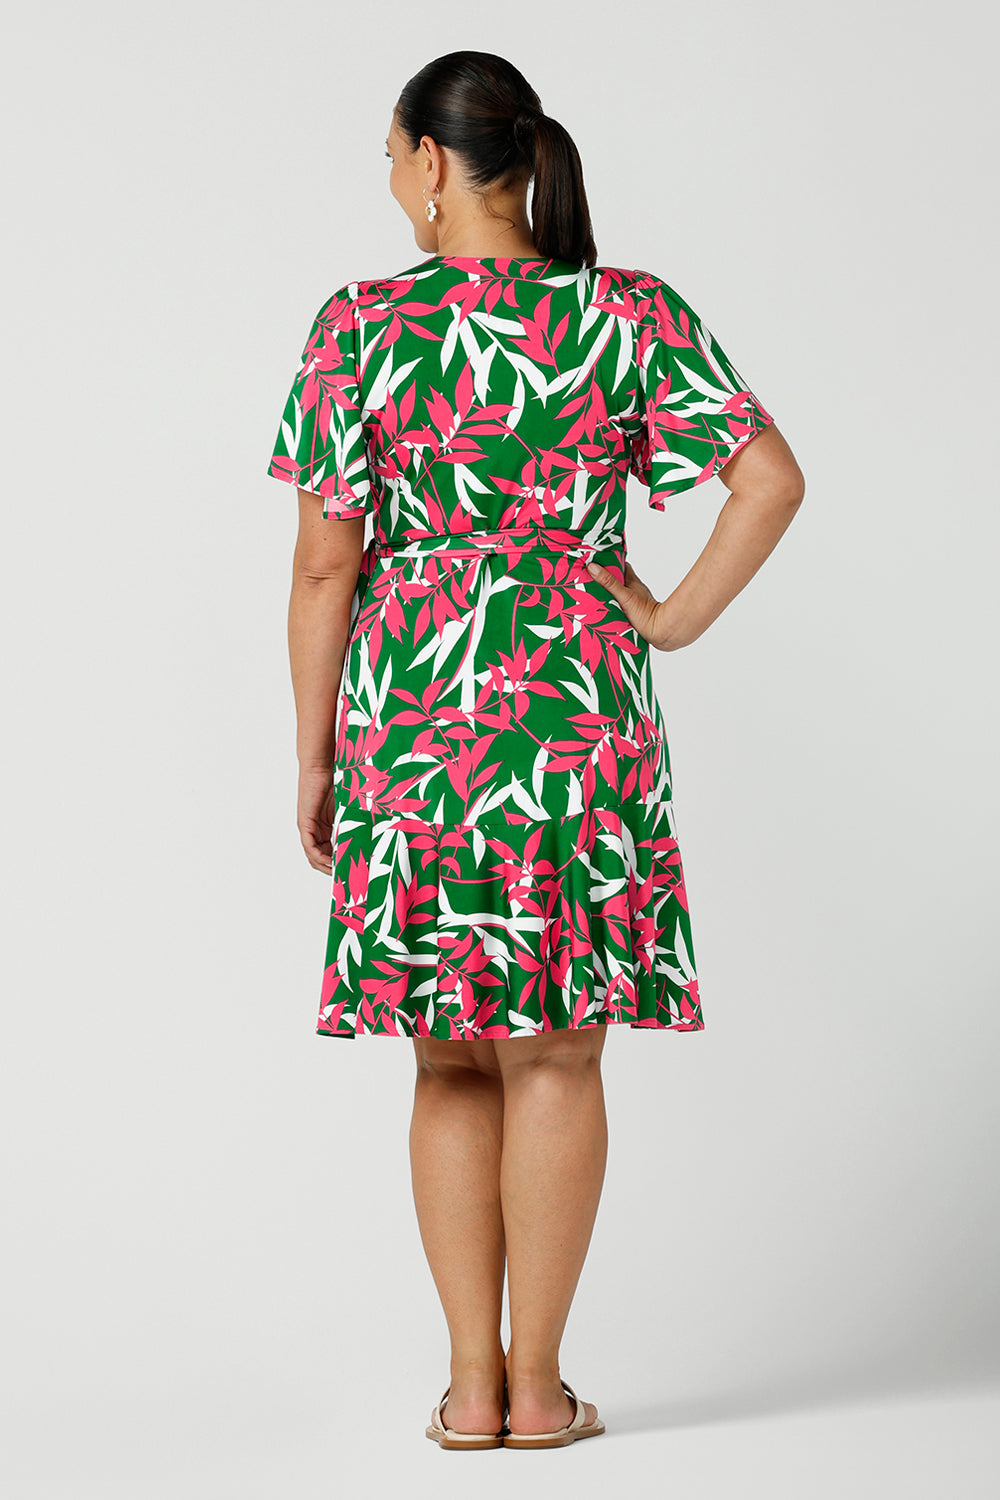 Back view of a woman in a size 12 jersey dress wears the Julie Dress that is a petite height friendly wrap dress. Designed in a green base fuchsia printed leaf print. With flutter sleeves and a functioning wrap tie with a frill hem. Designed and made in Australia for women size 8 - 24.